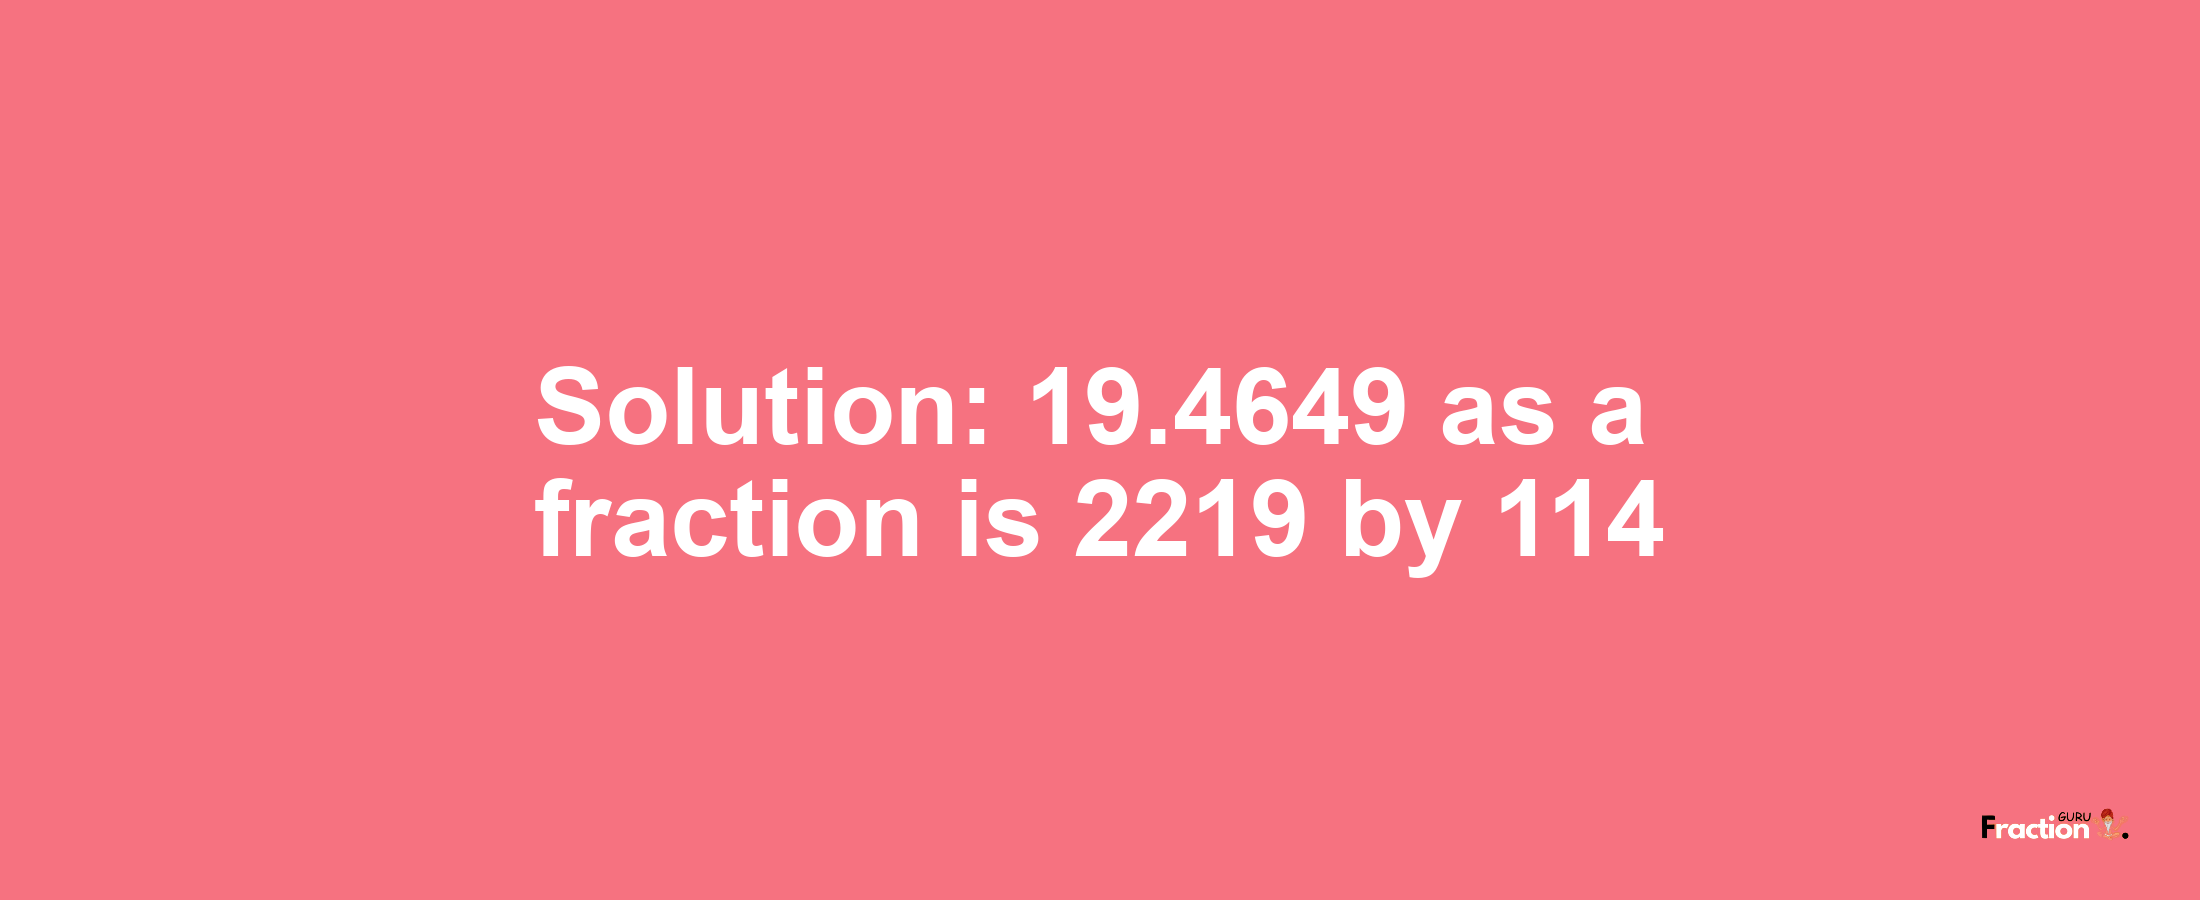 Solution:19.4649 as a fraction is 2219/114